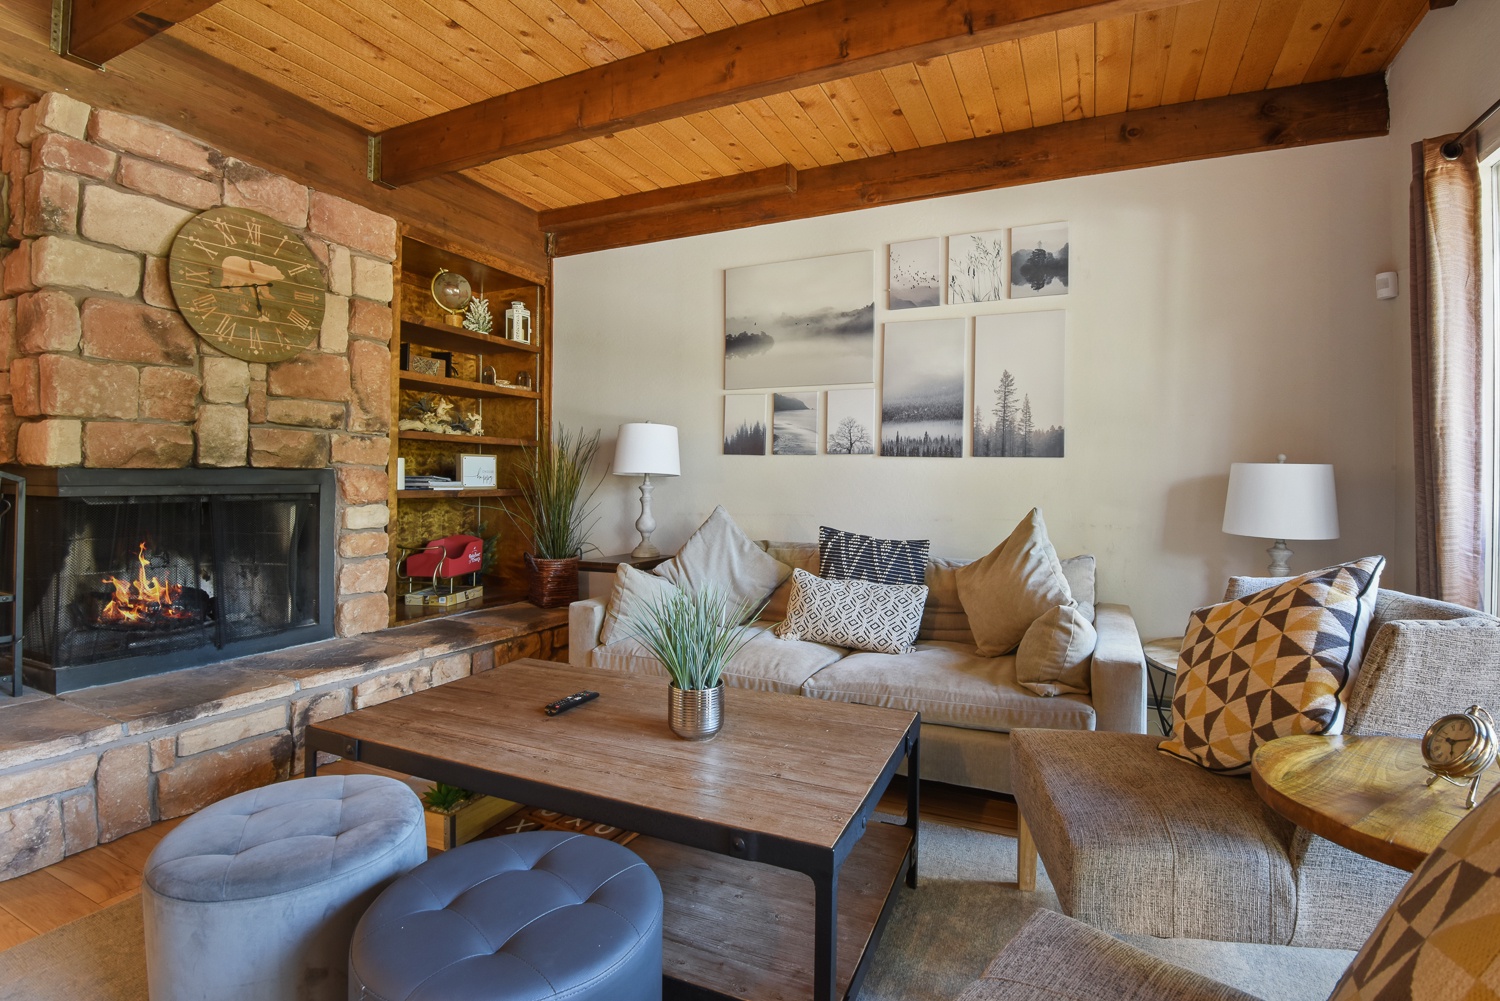 Elegant, rustic finishes compliment the comfy furnishings in the living room